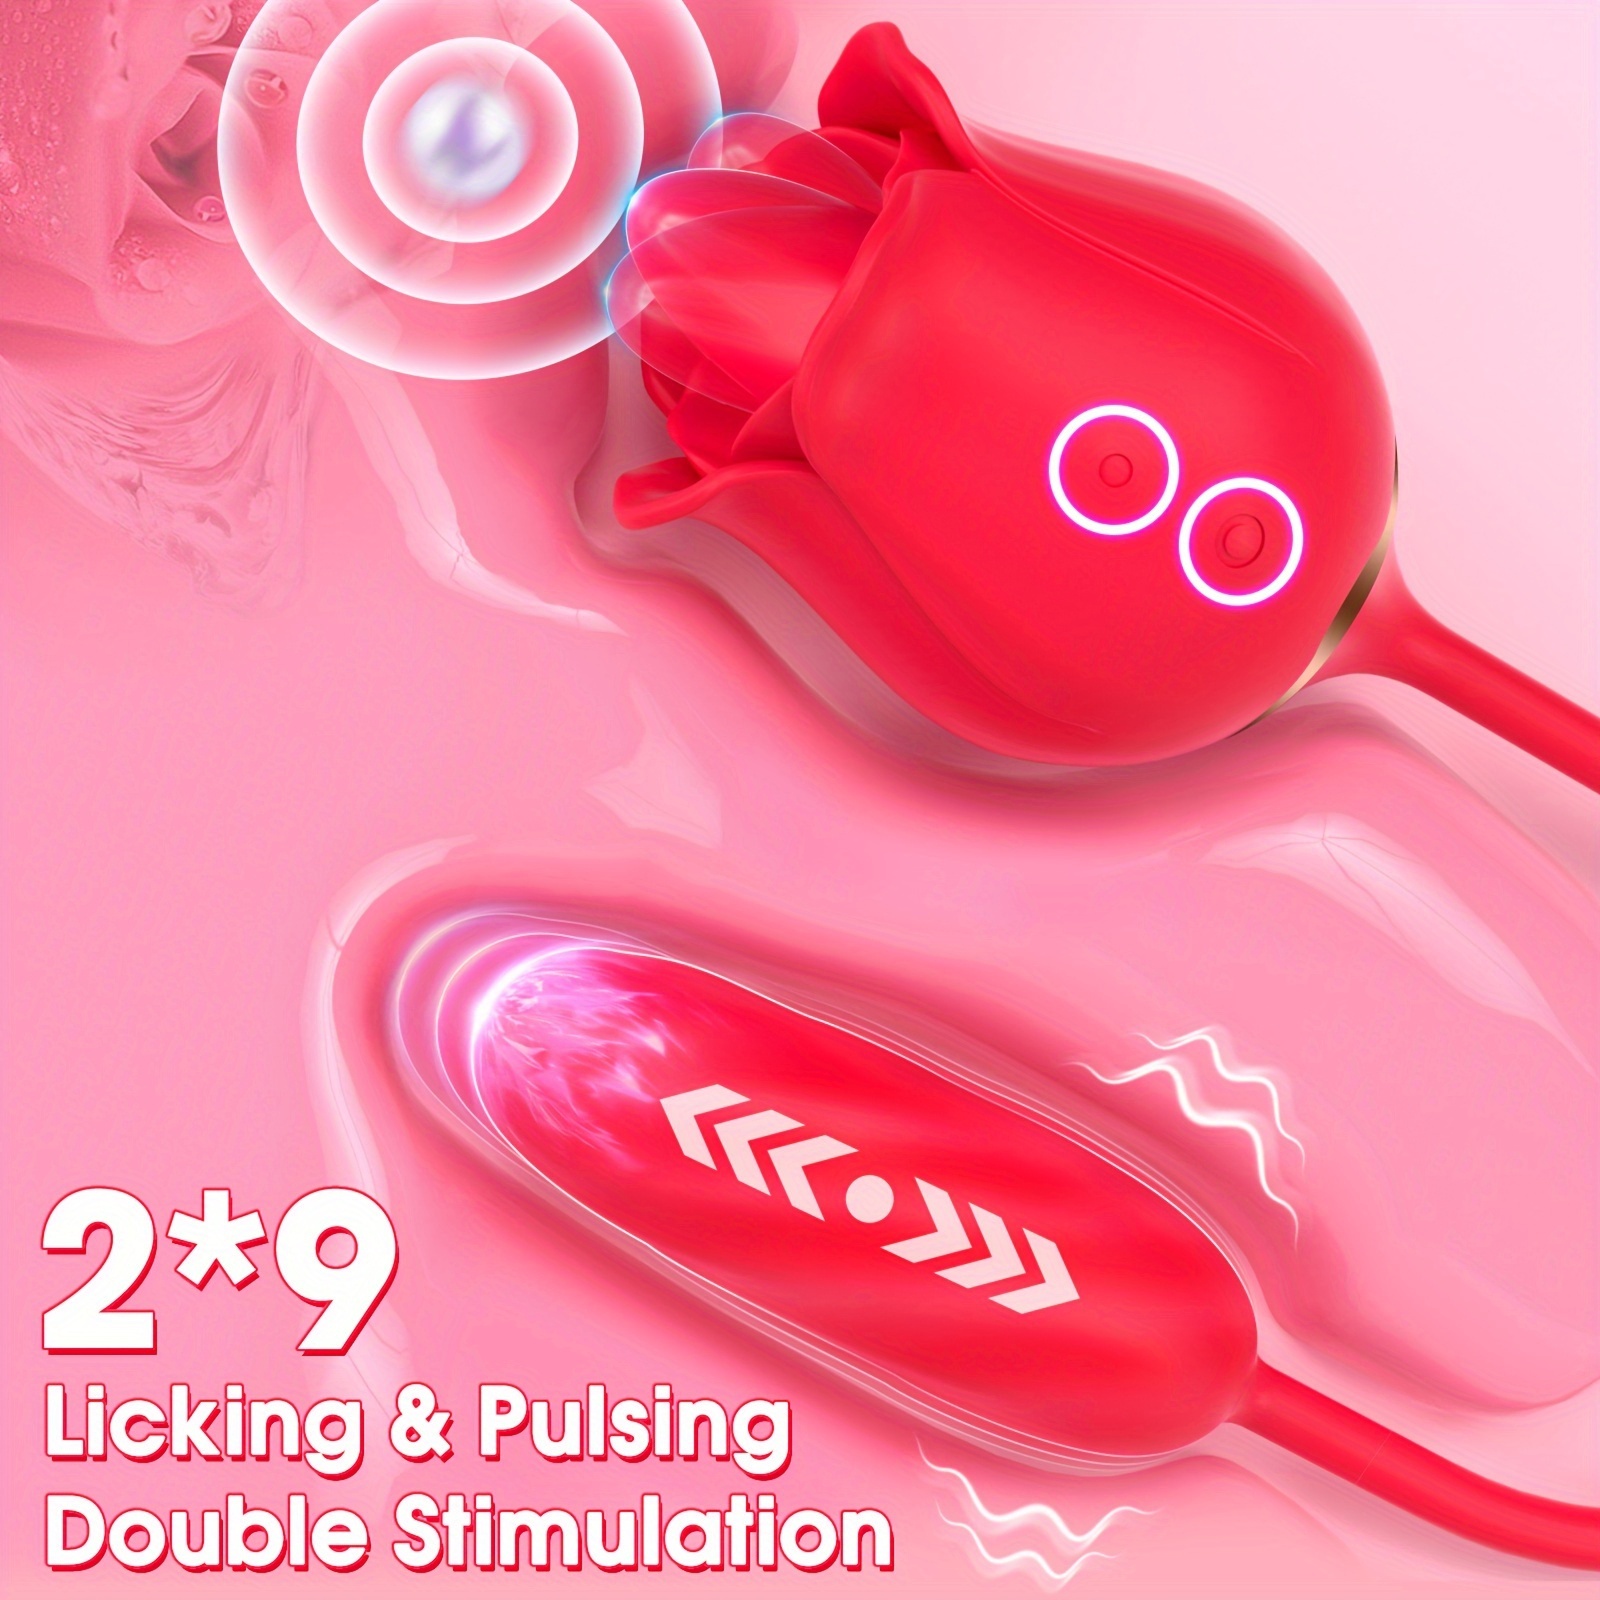 Rose Sex Toys Vibrator for Women,3 in 1 Tongue Licking Thrusting Dildo G  Spot Vibrators Adult Rose Toy with 9 Vibration Modes Clitoral Stimulator